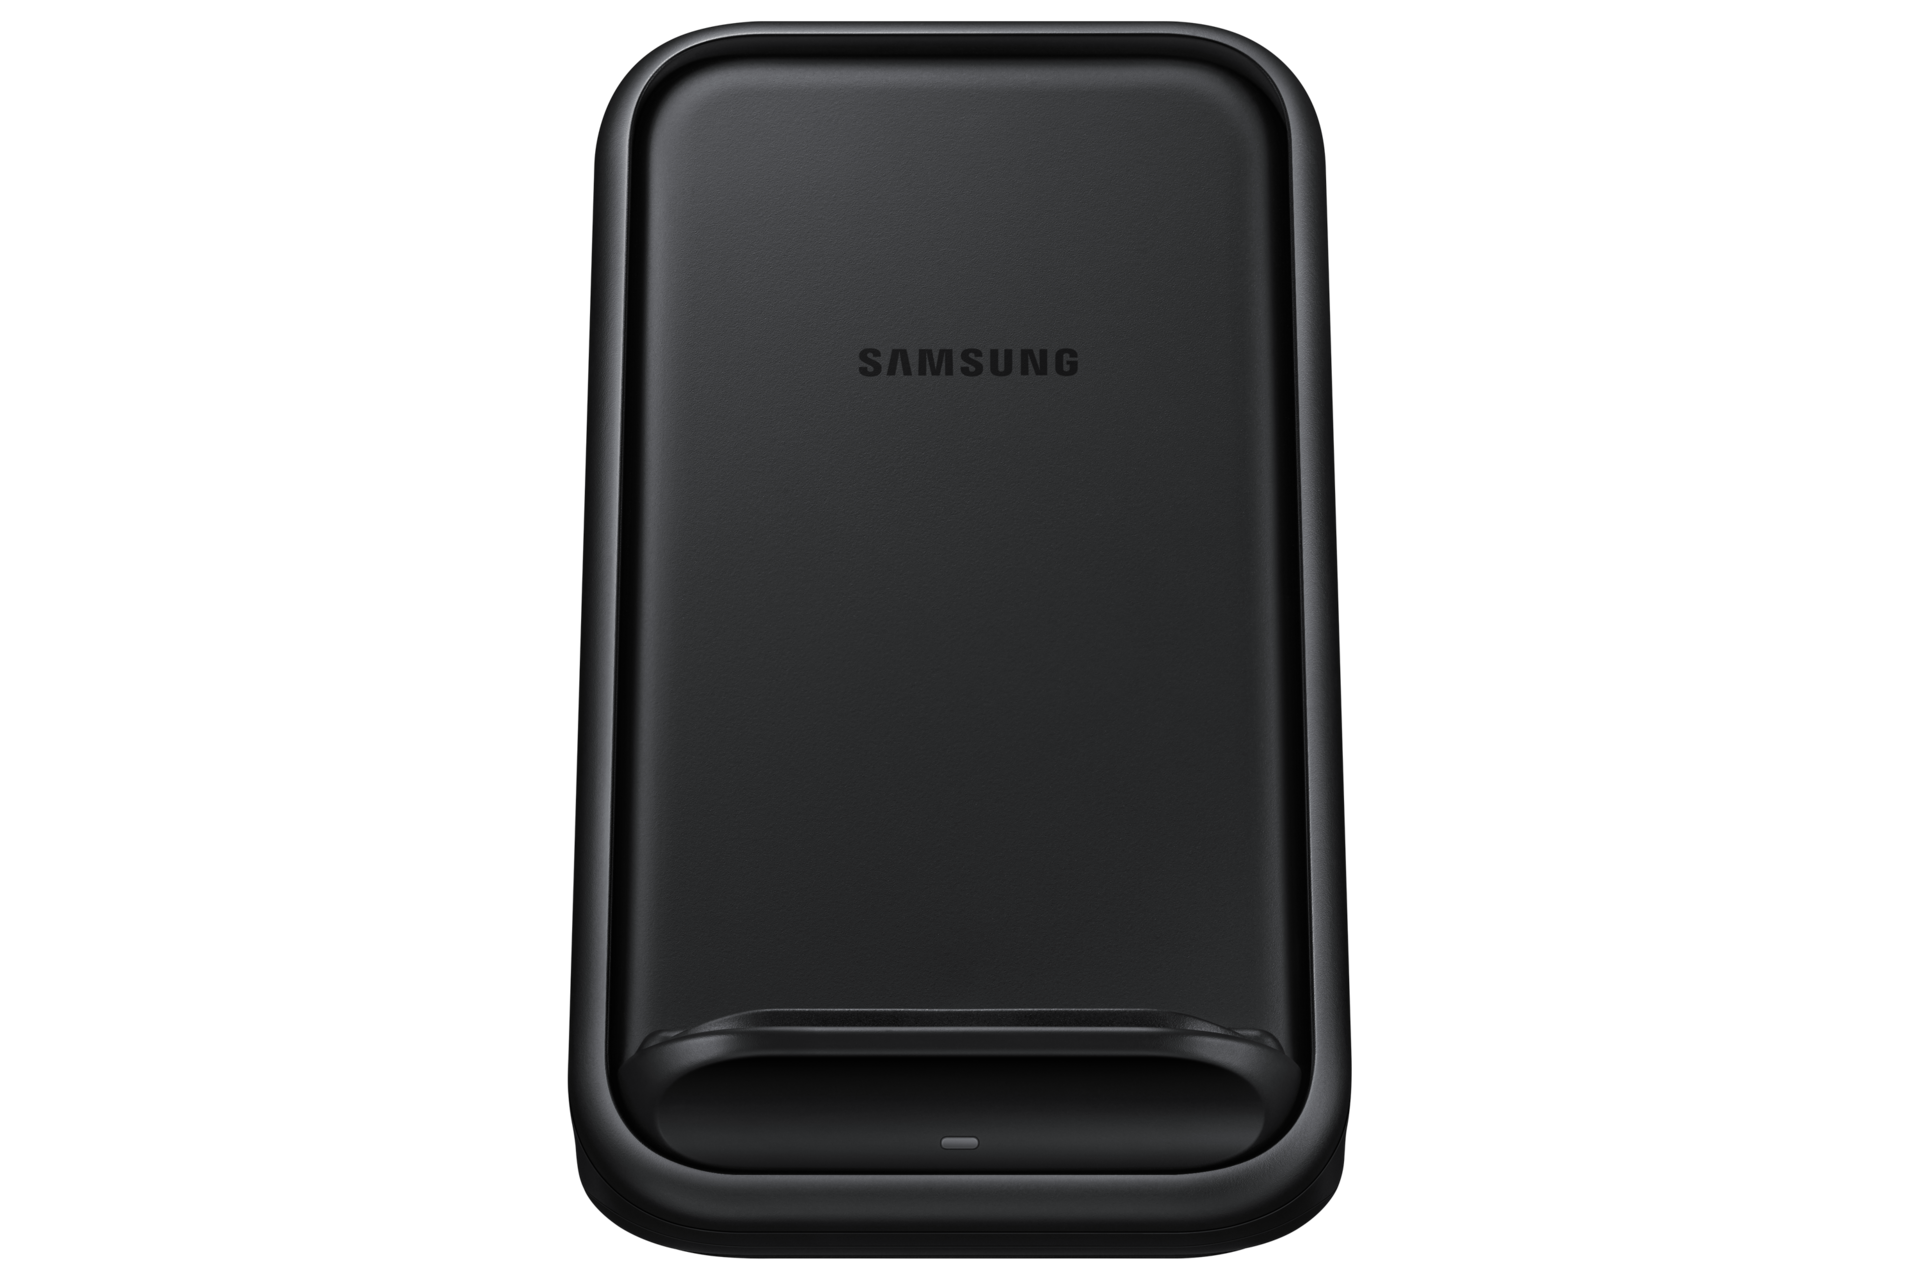  Samsung Qi Certified Wireless Charging Pad with 2A Wall Charger-  Supports charging on Qi compatible smartphones including the Samsung Galaxy  S8, S8+, Note 8, Apple iPhone 8, iPhone 8 Plus, and